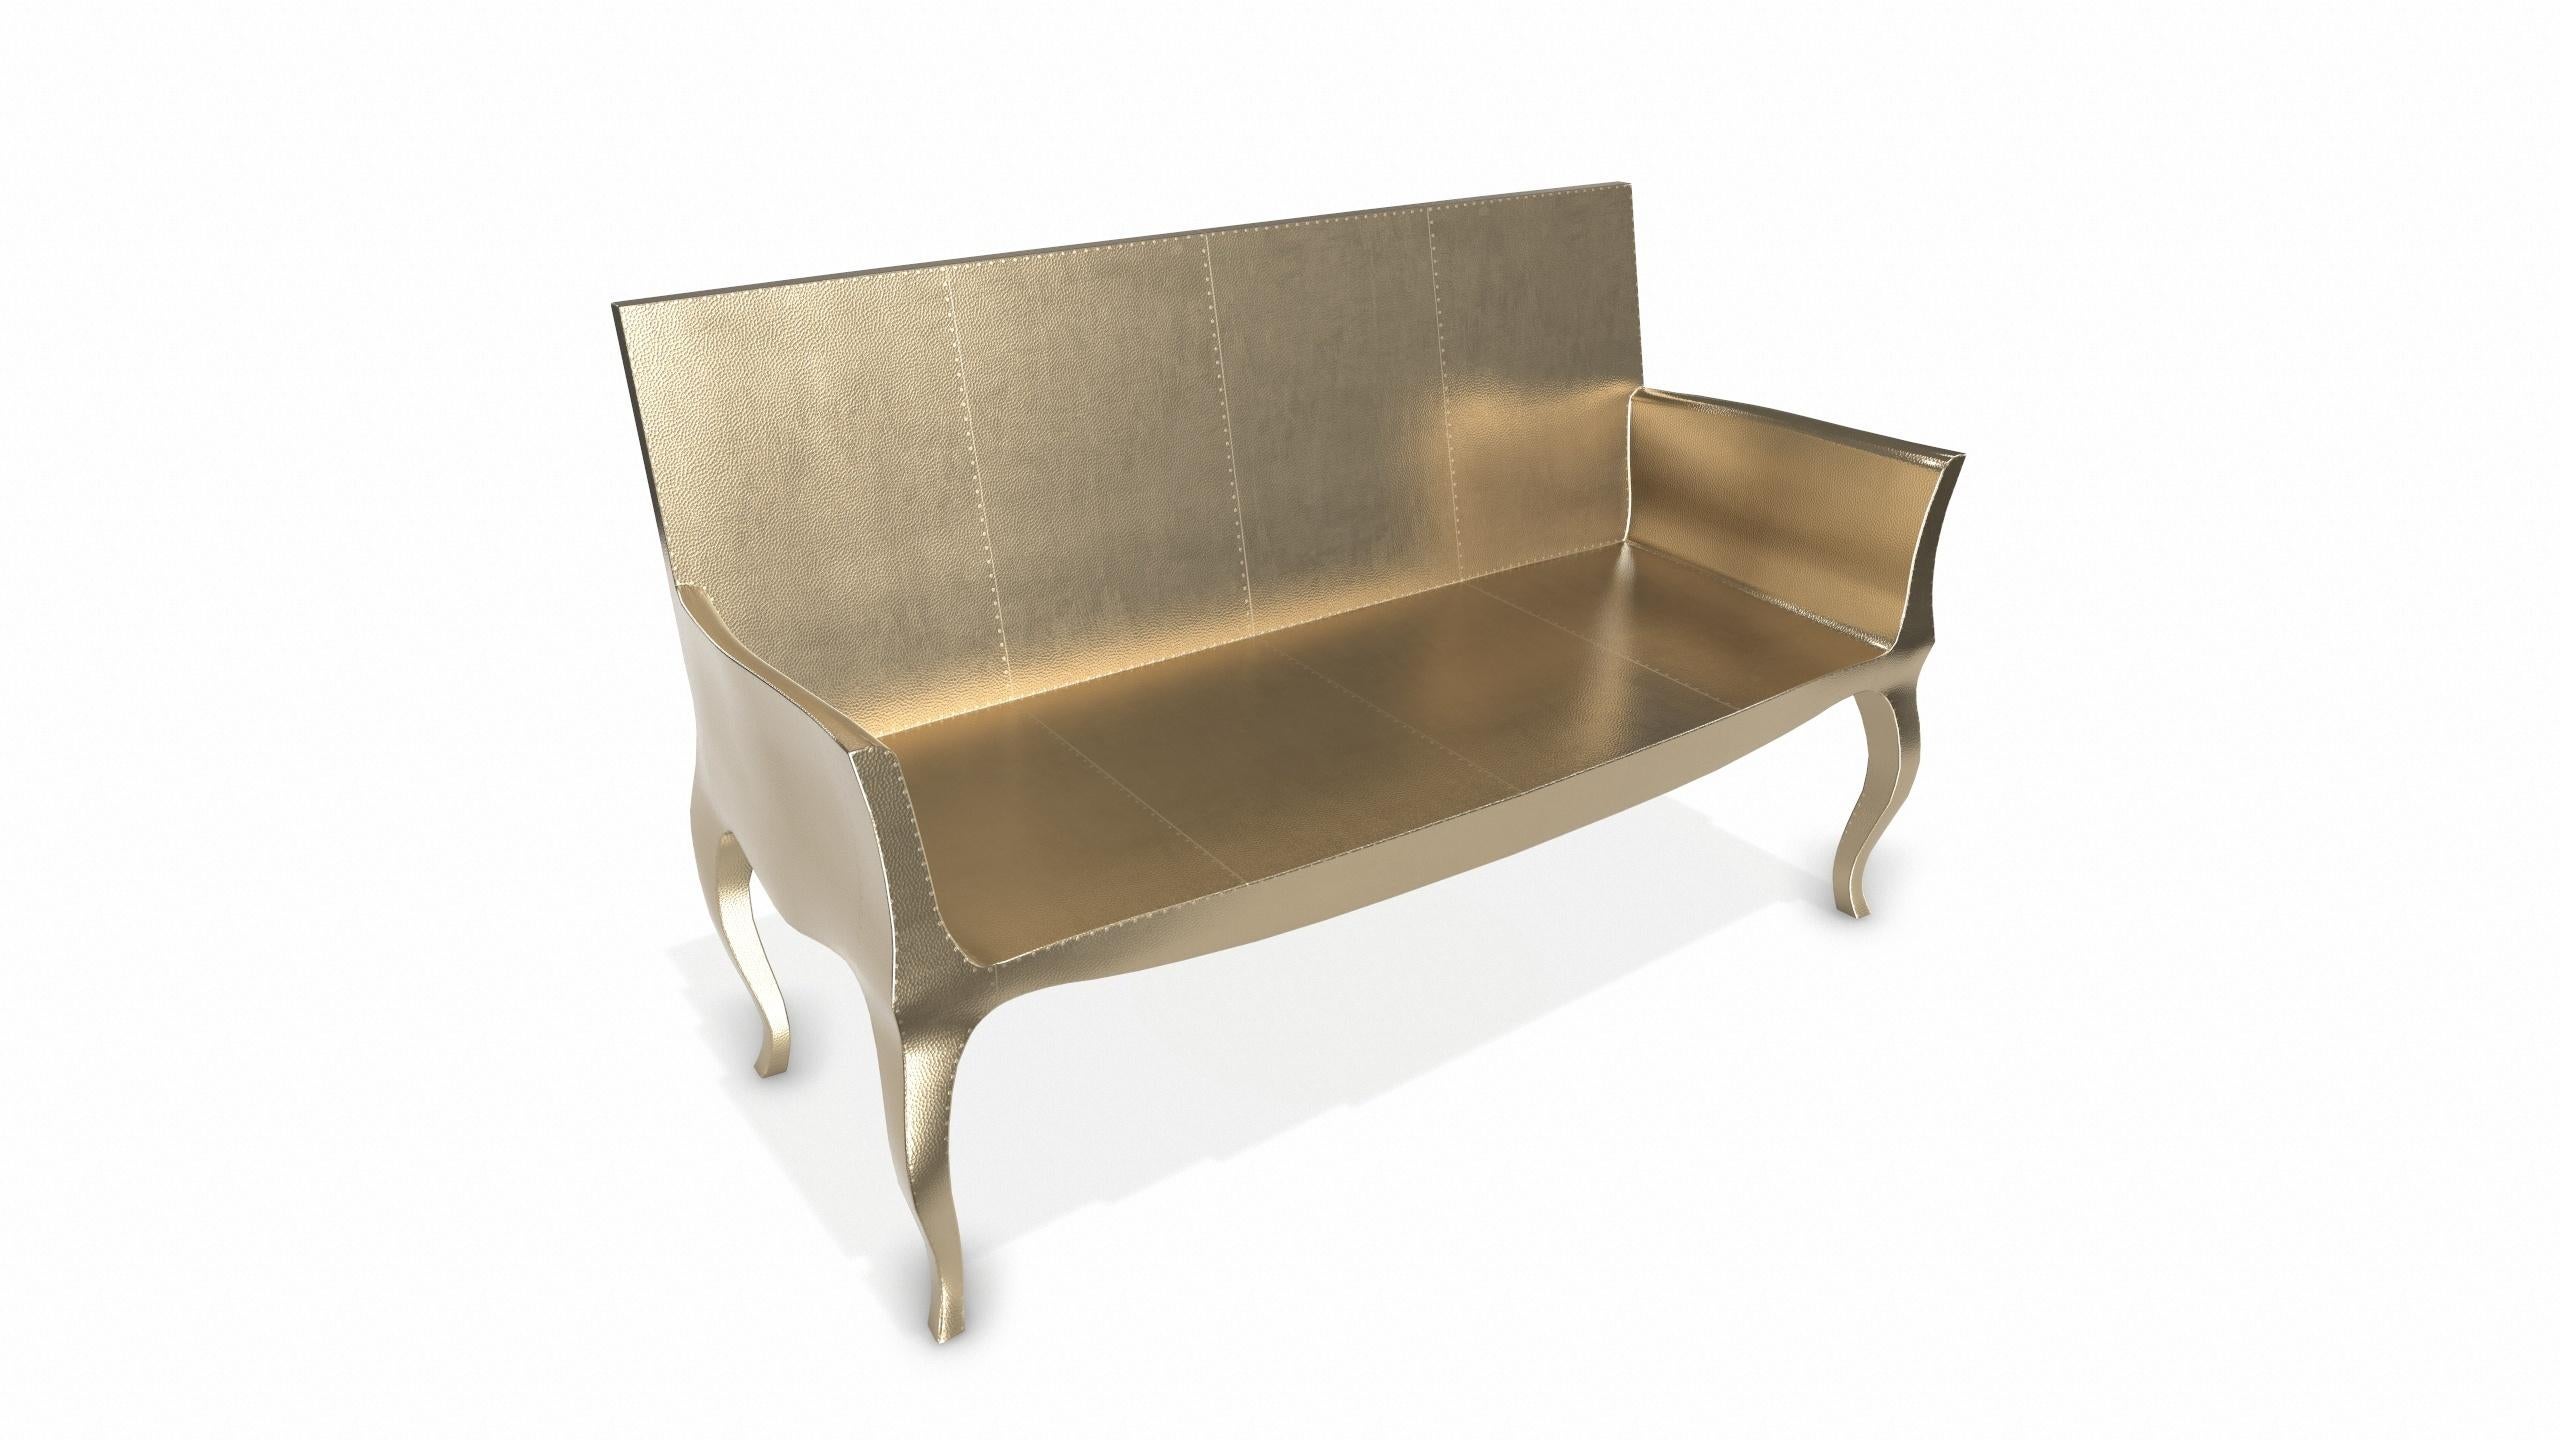 Louise Settee Art Deco Daybeds in Mid. Hammered Brass by Paul Mathieu For Sale 2